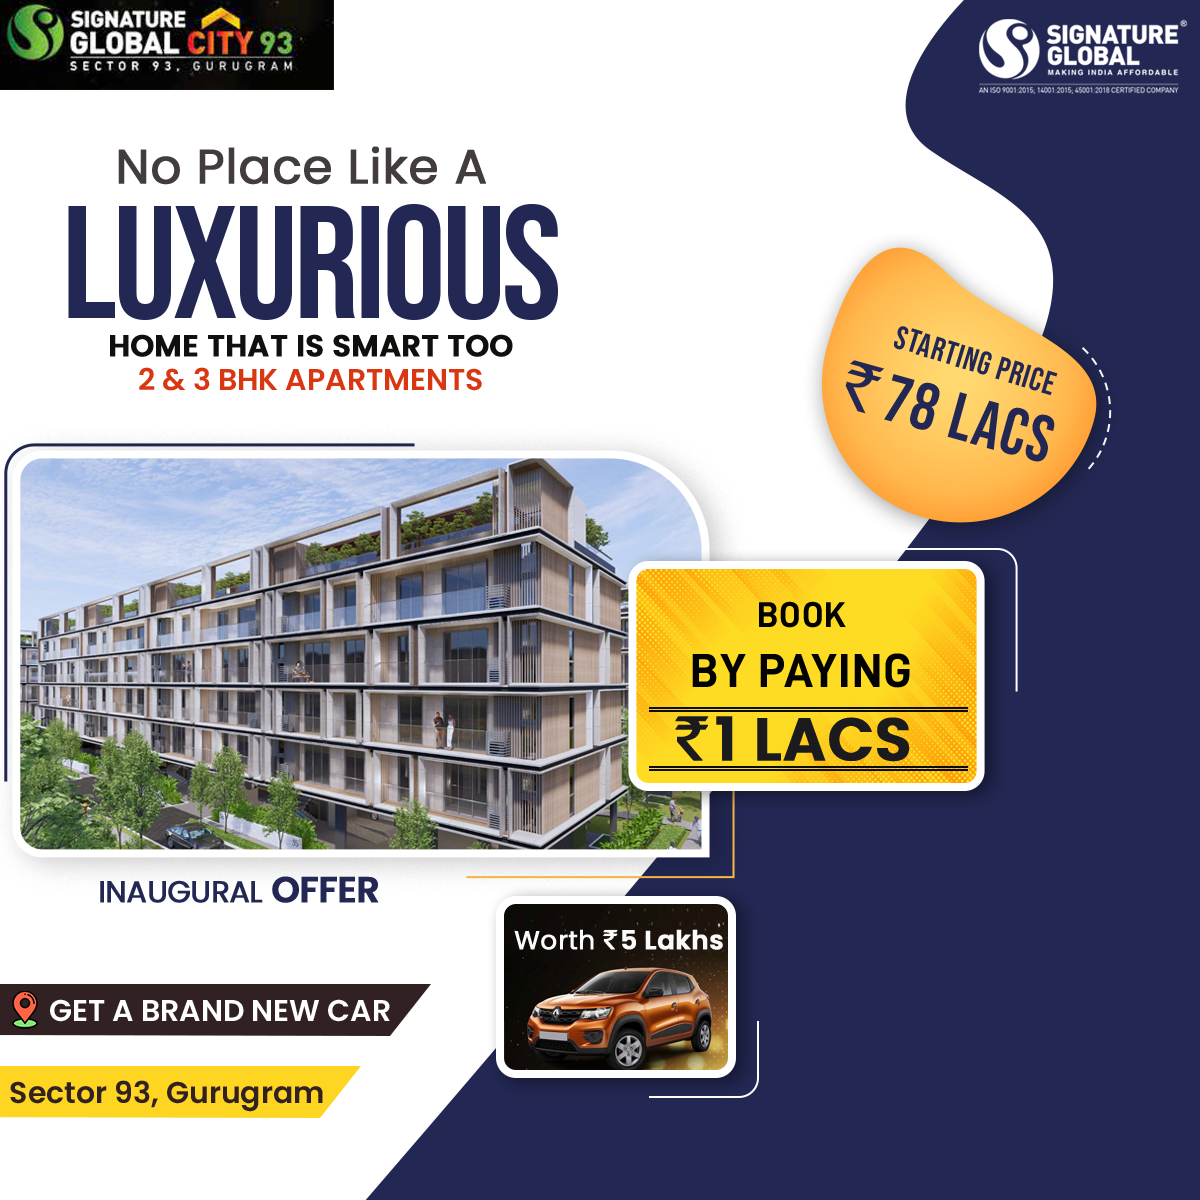 Book by paying Rs 1 Lac at Signature Global City 93, Gurgaon Update